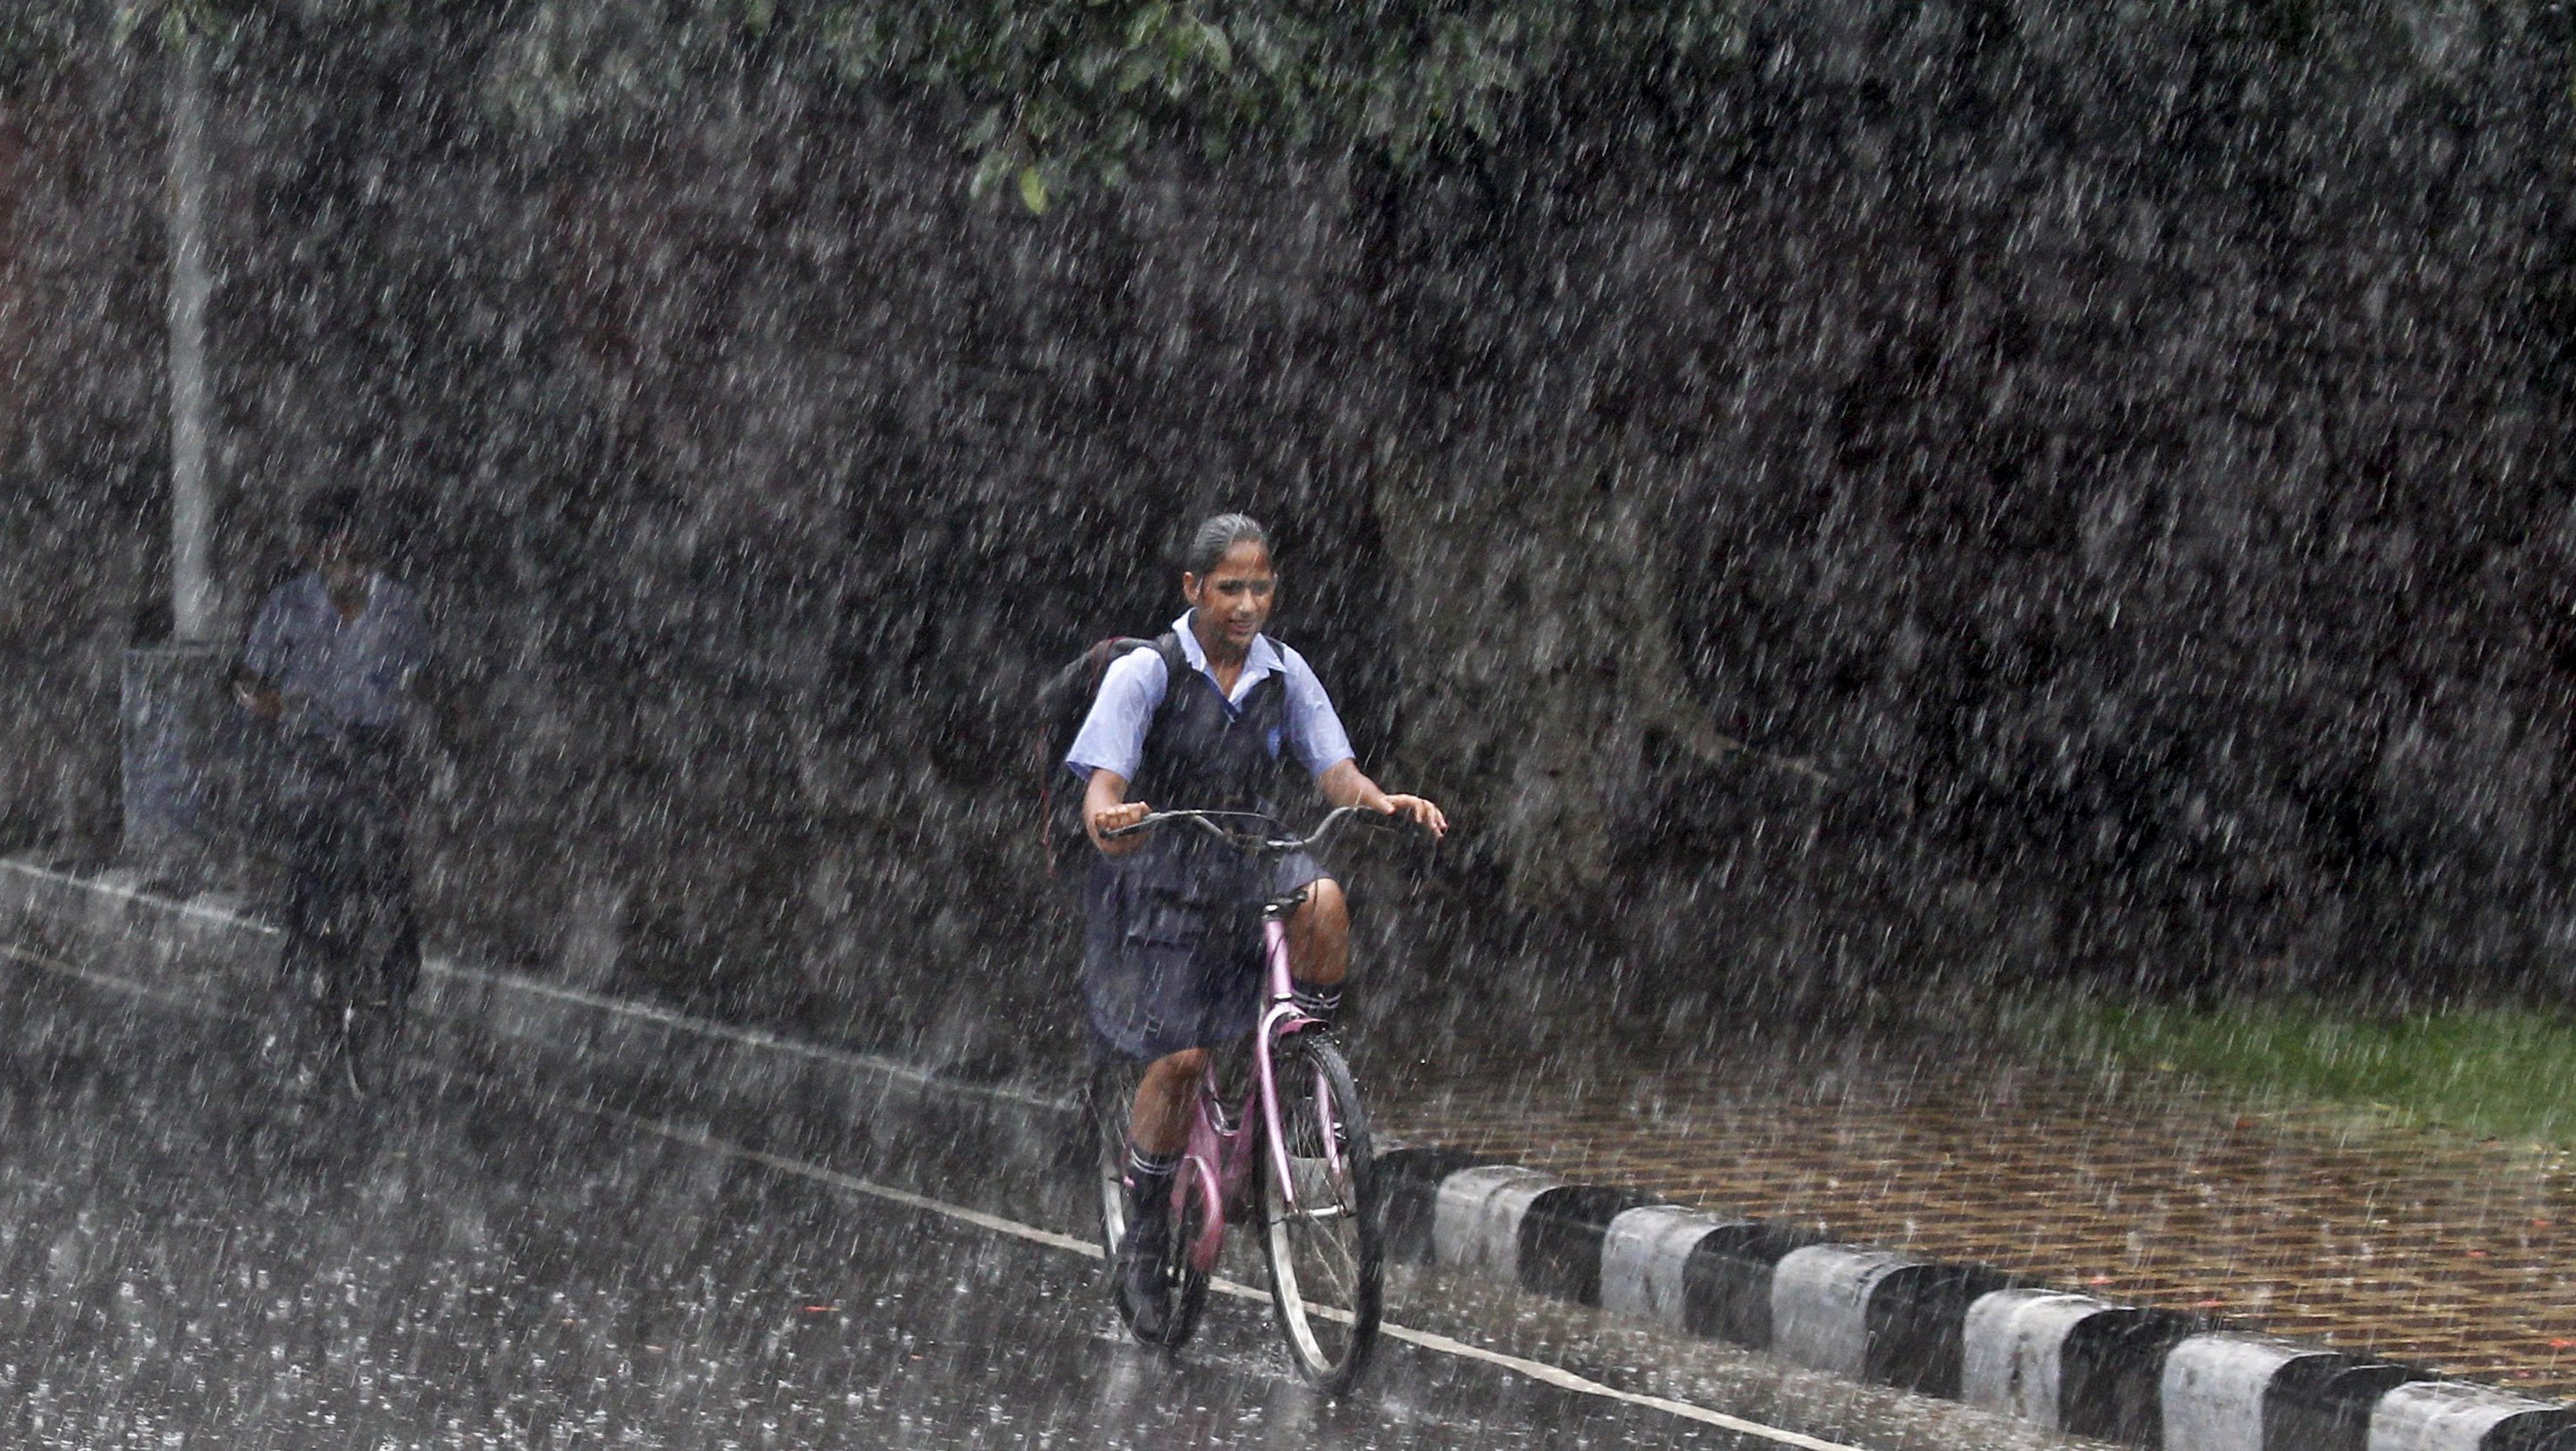 weather update: imd predicts rainfall in central and east india; delhi’s temperature set to rise – check full forecast